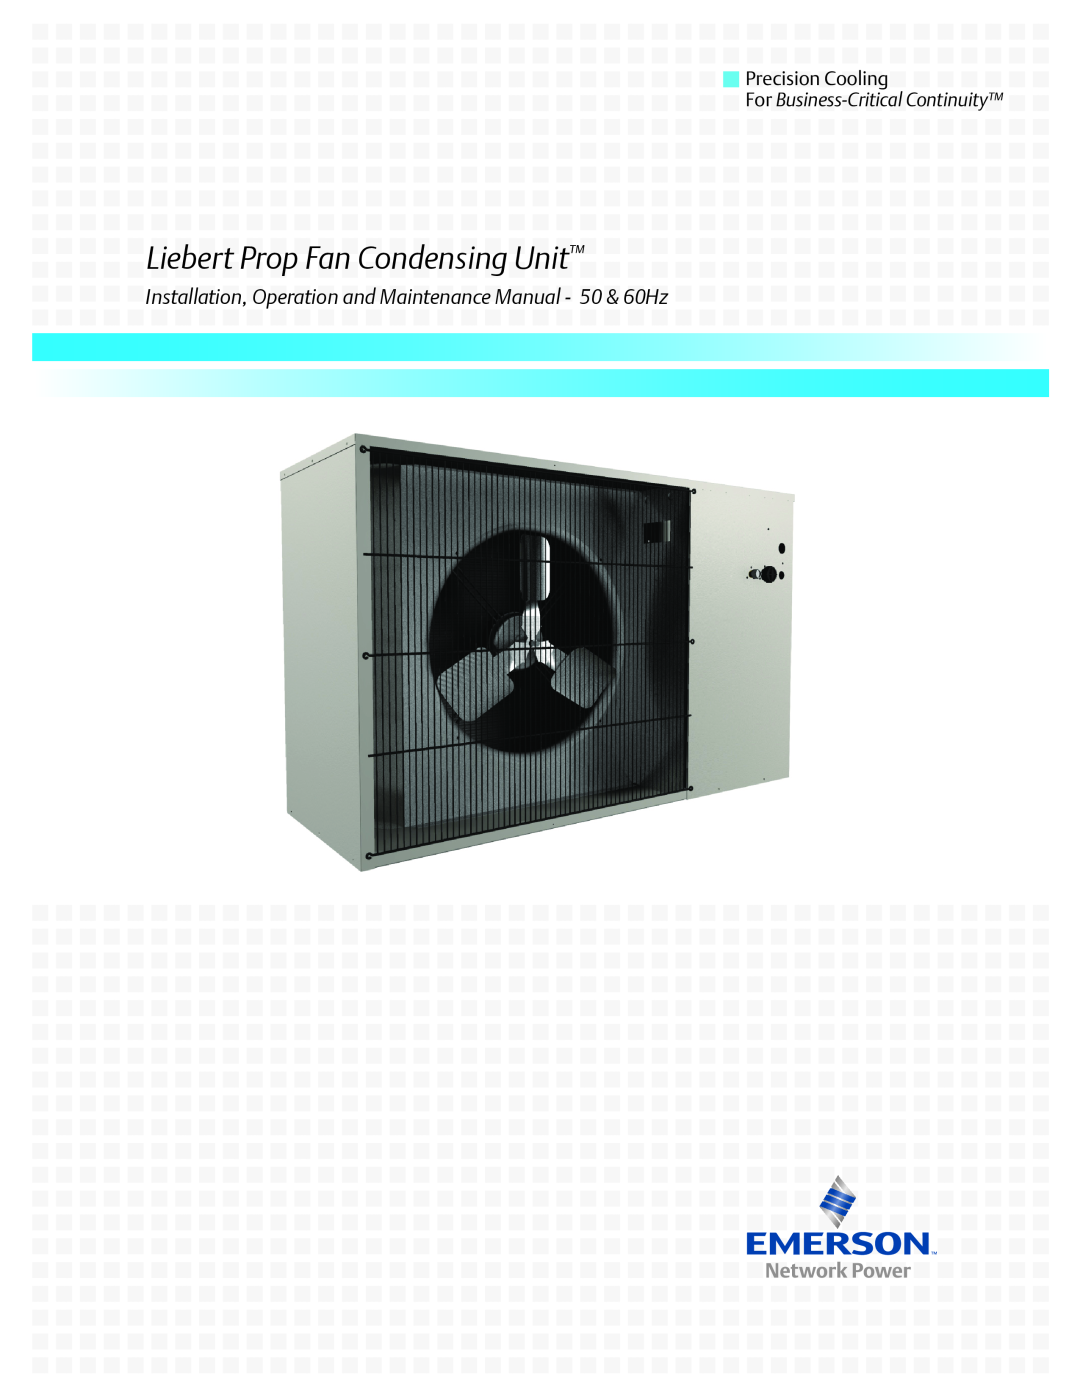 Emerson Figure i manual Liebert Prop Fan Condensing Unit, Precision Cooling, For Business-CriticalContinuity 